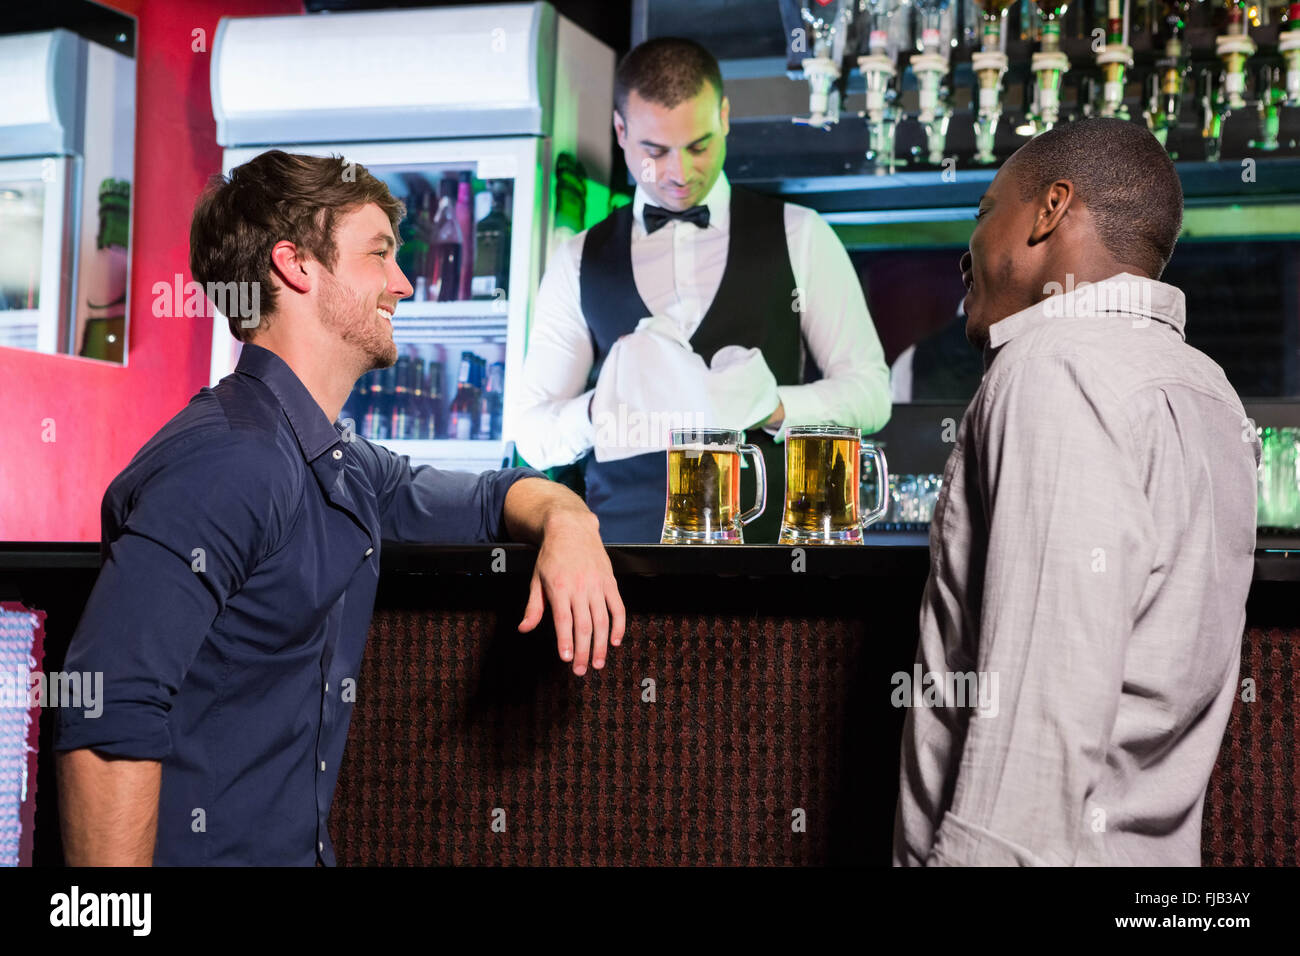 Two men smiling and talking to each other while having beer at bar counter Stock Photo